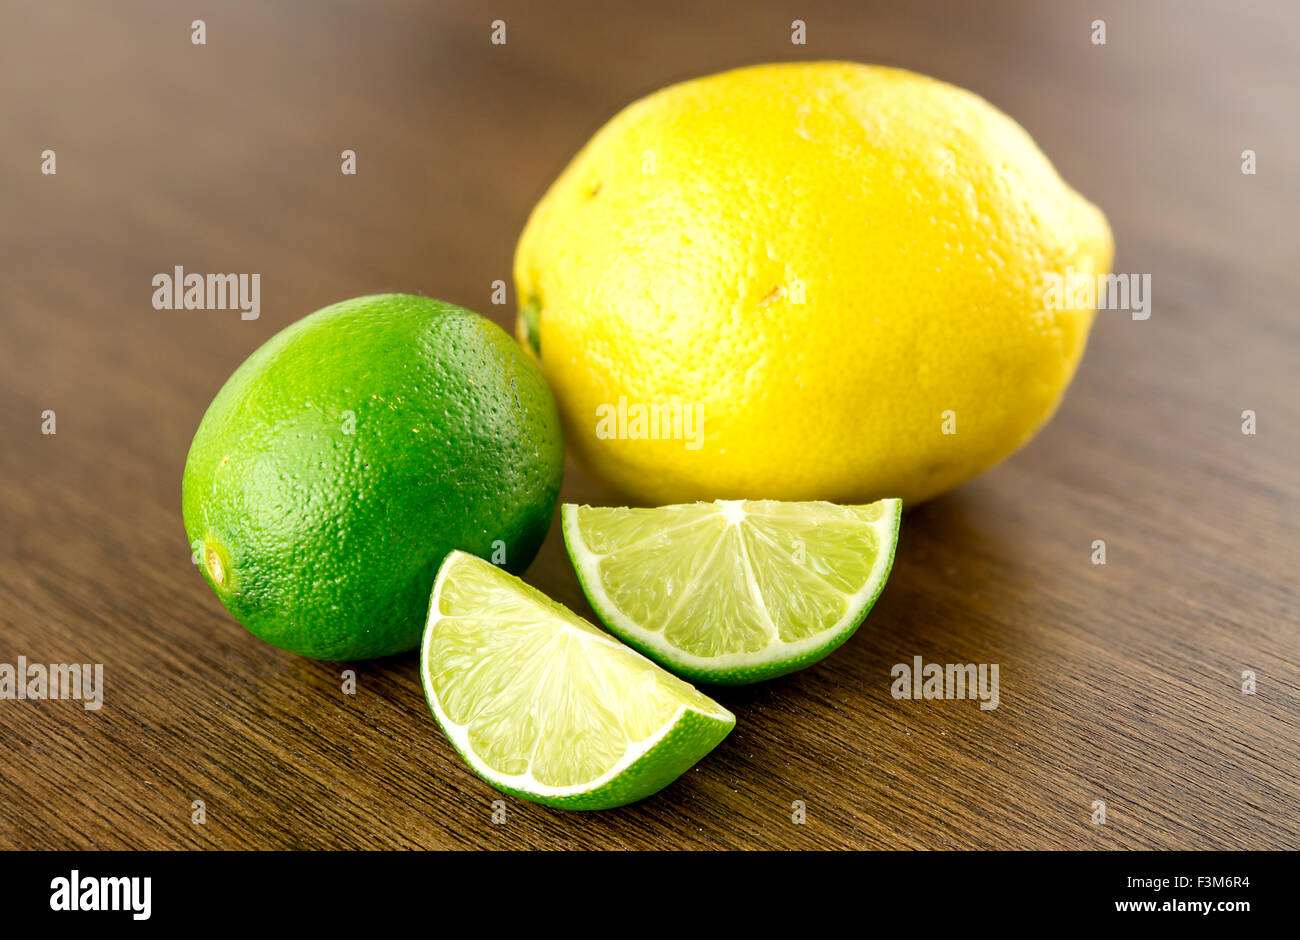 Cut limes and lemon on wooden background Stock Photo